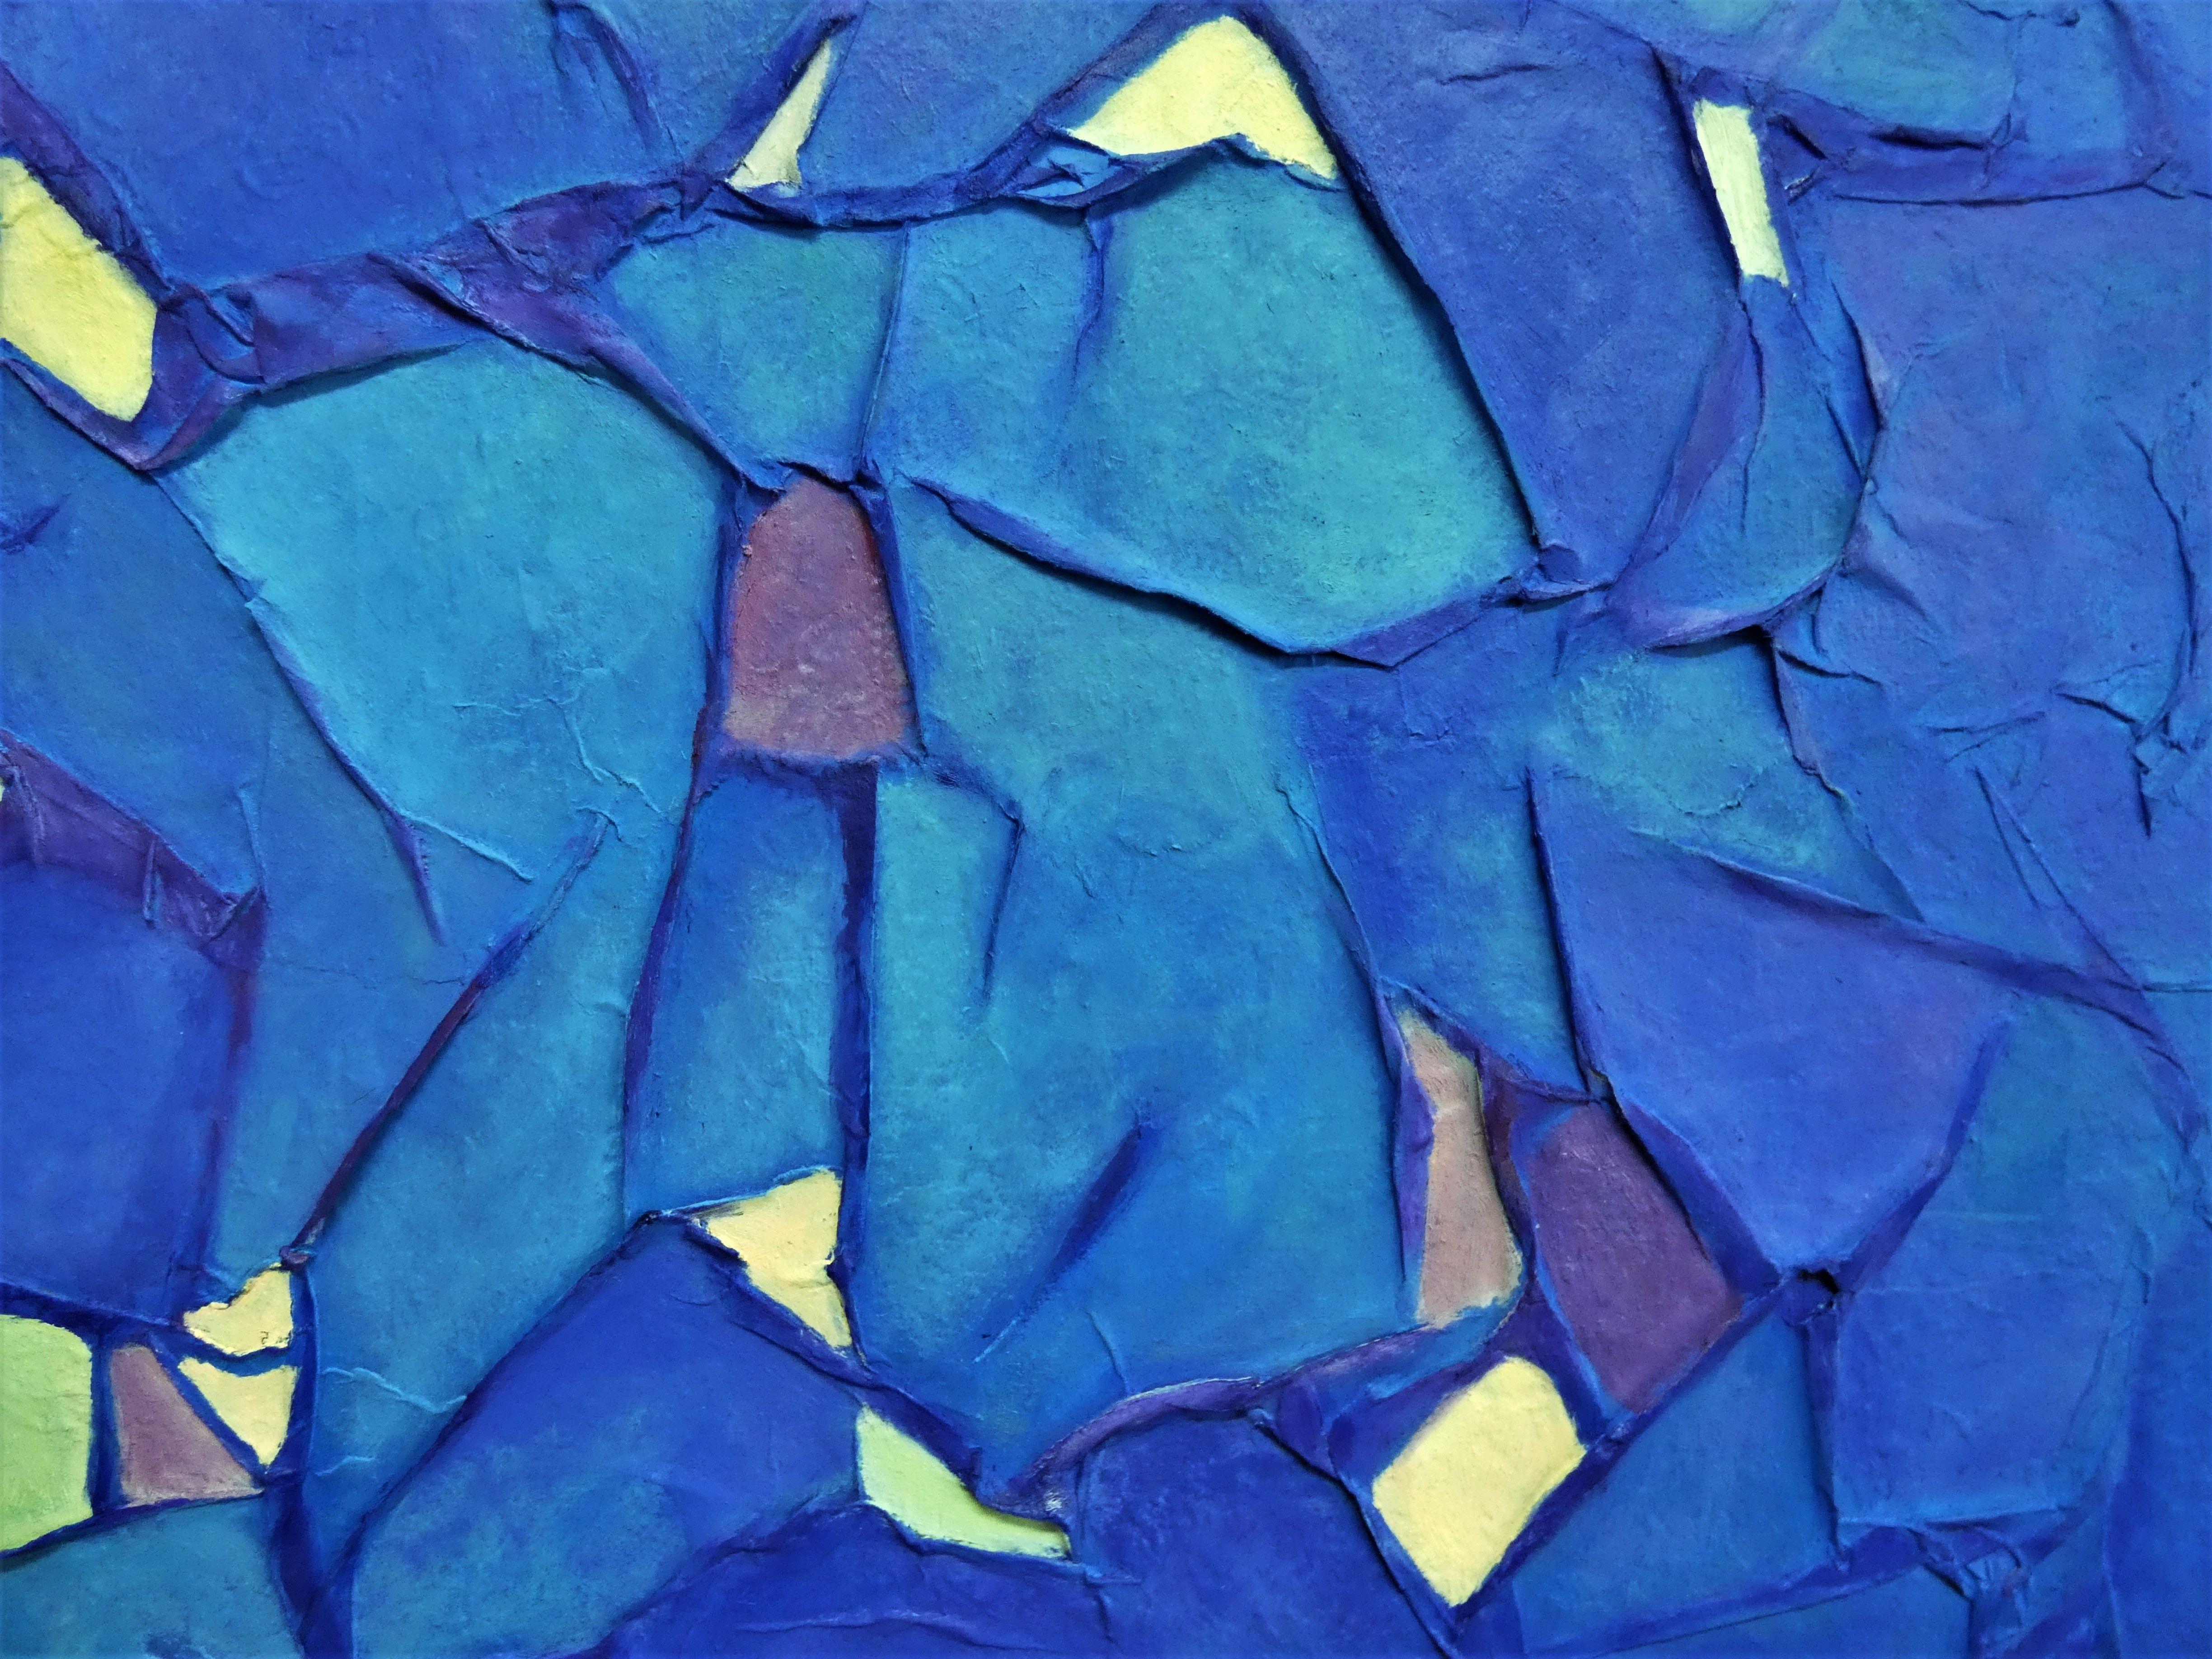 Reaction, Painting, Oil on Canvas - Blue Abstract Painting by Felicia Trales